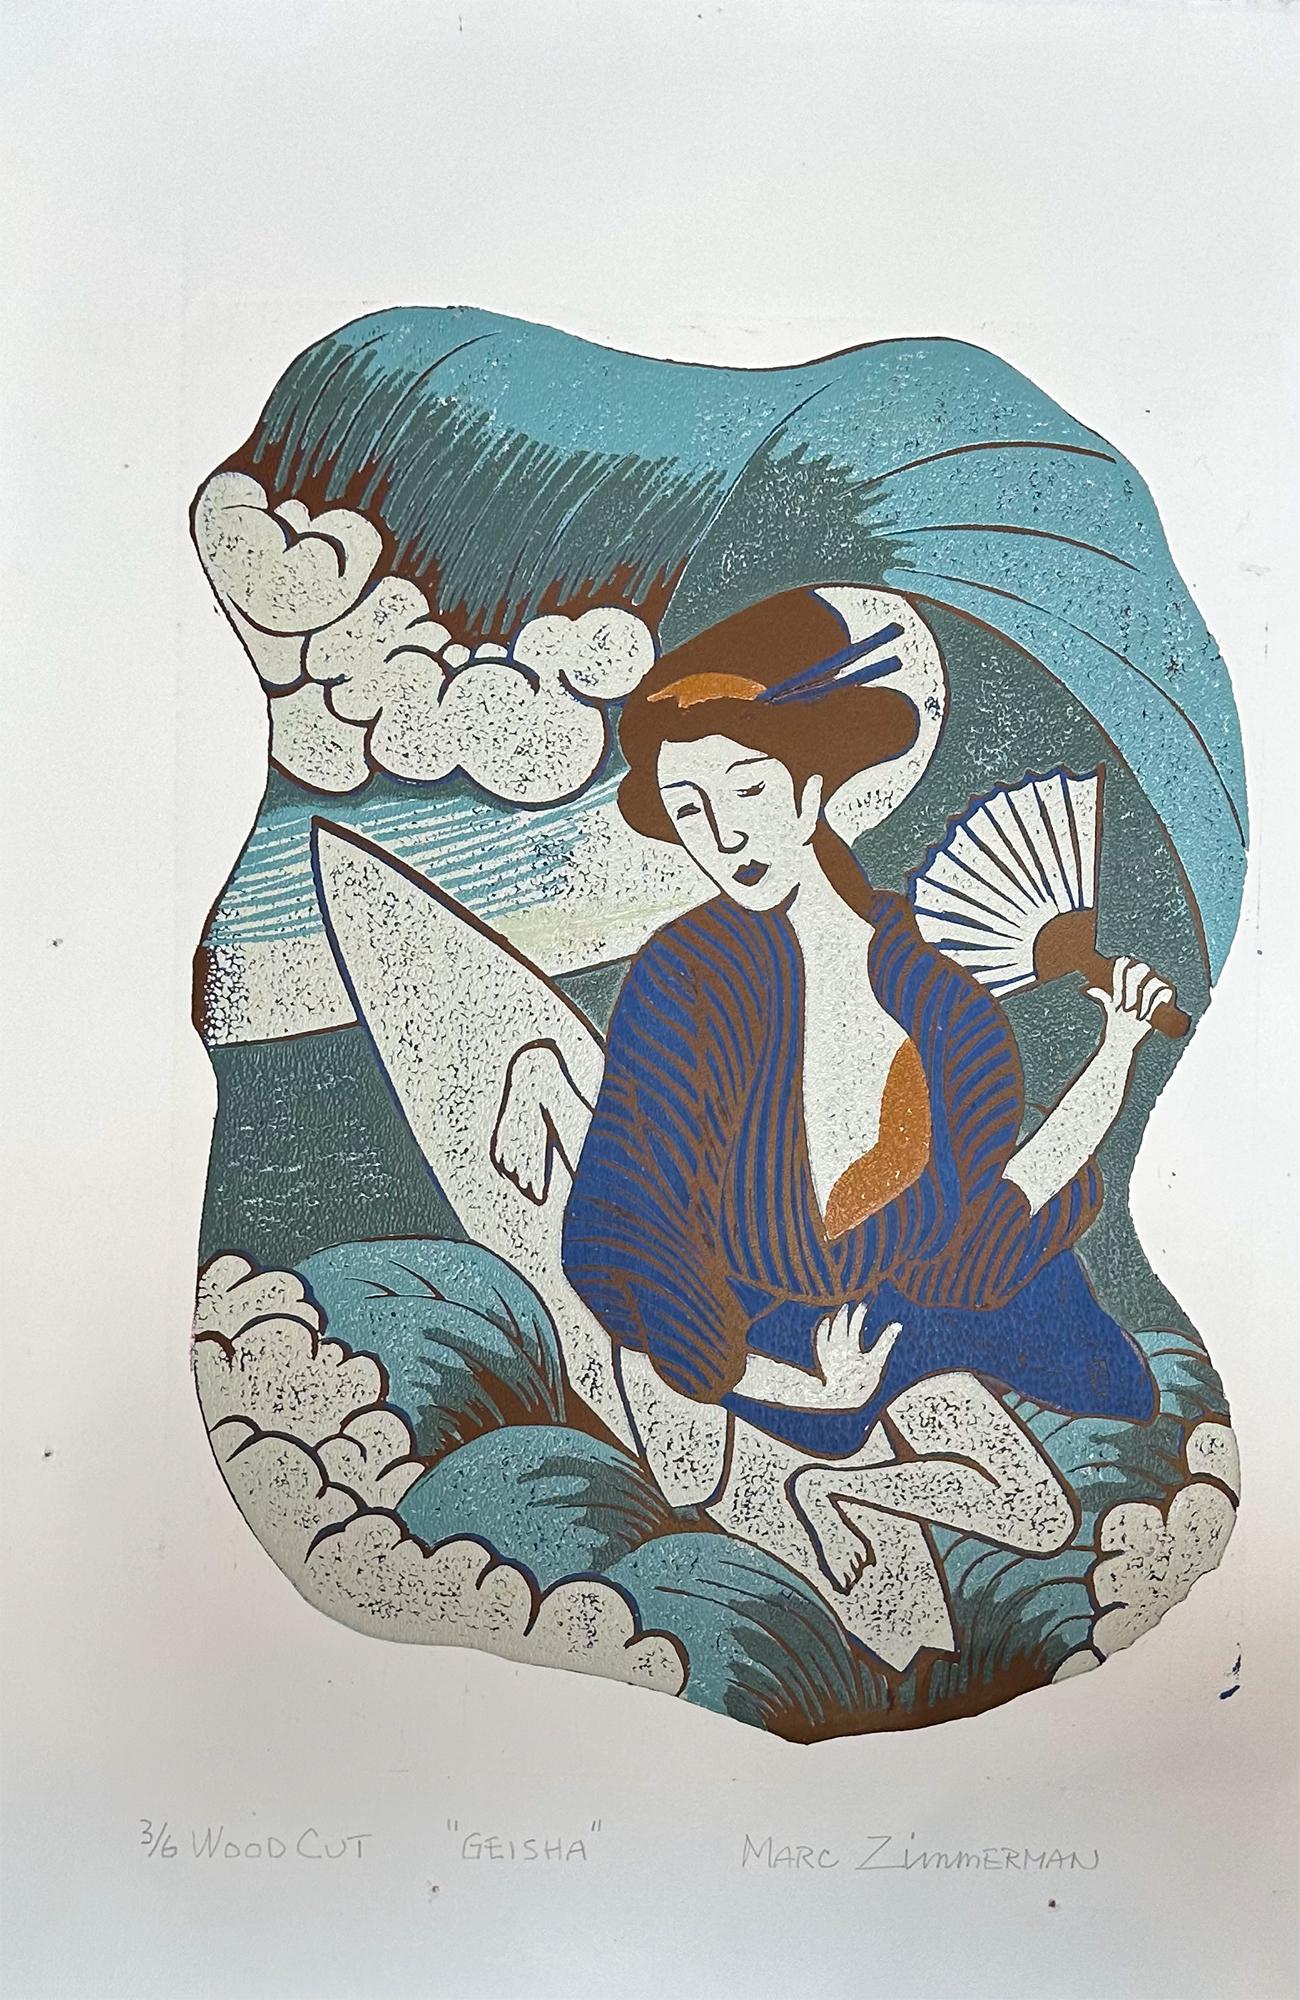 Geisha - Surfing Art - Figurative - Woodcut Print By Marc Zimmerman

Limited Edition 01/04

This masterwork is exhibited in the Zimmerman Gallery, Carmel CA.

Immerse yourself in the captivating world of surfing and ocean vibes with Marc Zimmerman's